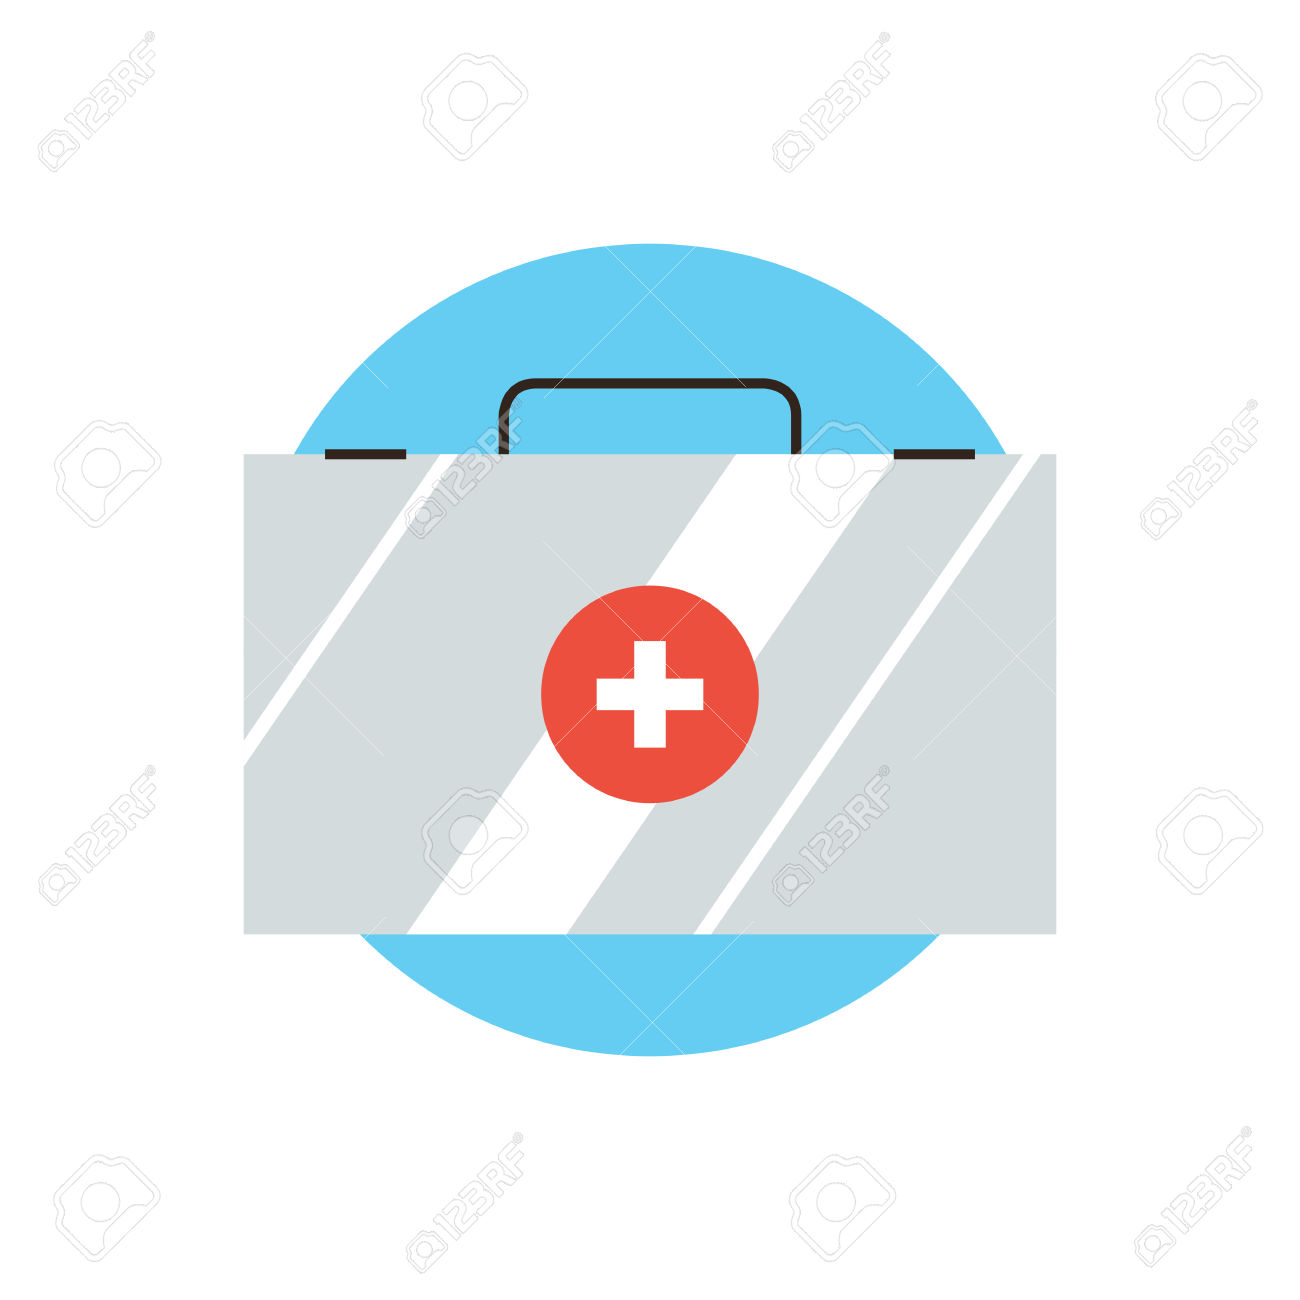 Thin Line Icon With Flat Design Element Of First Aid Kit, Case.